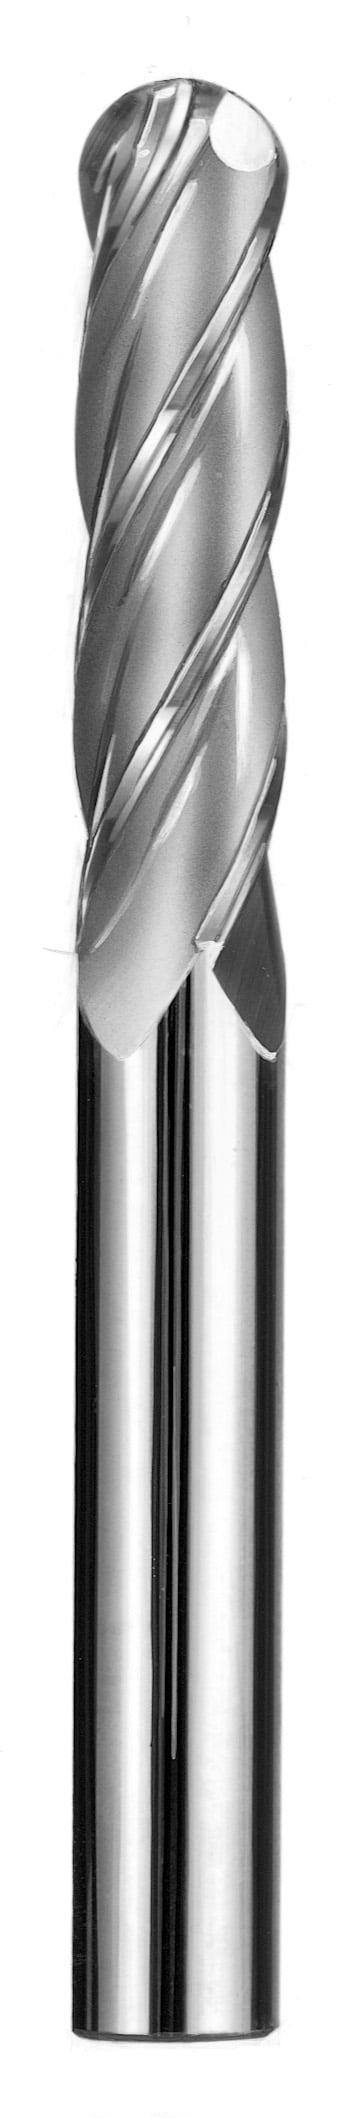 5/8" Dia, 4 Flute, Ball Nose End Mill - 33114